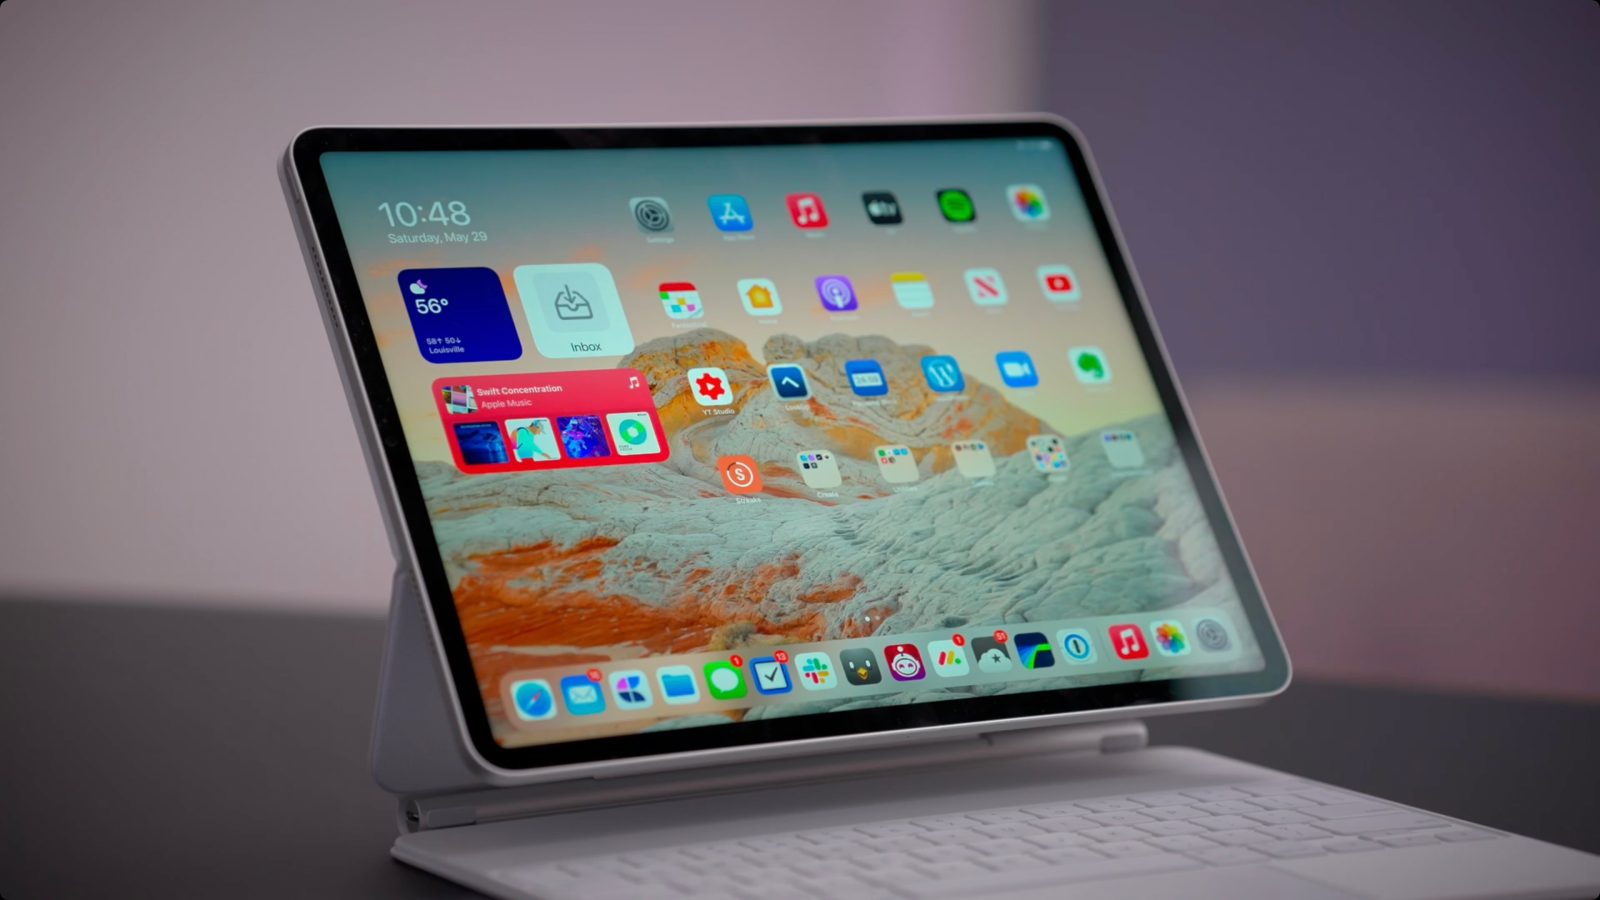 Why the M1 iPad Pro is still a great option – perhaps even better than the M2 model